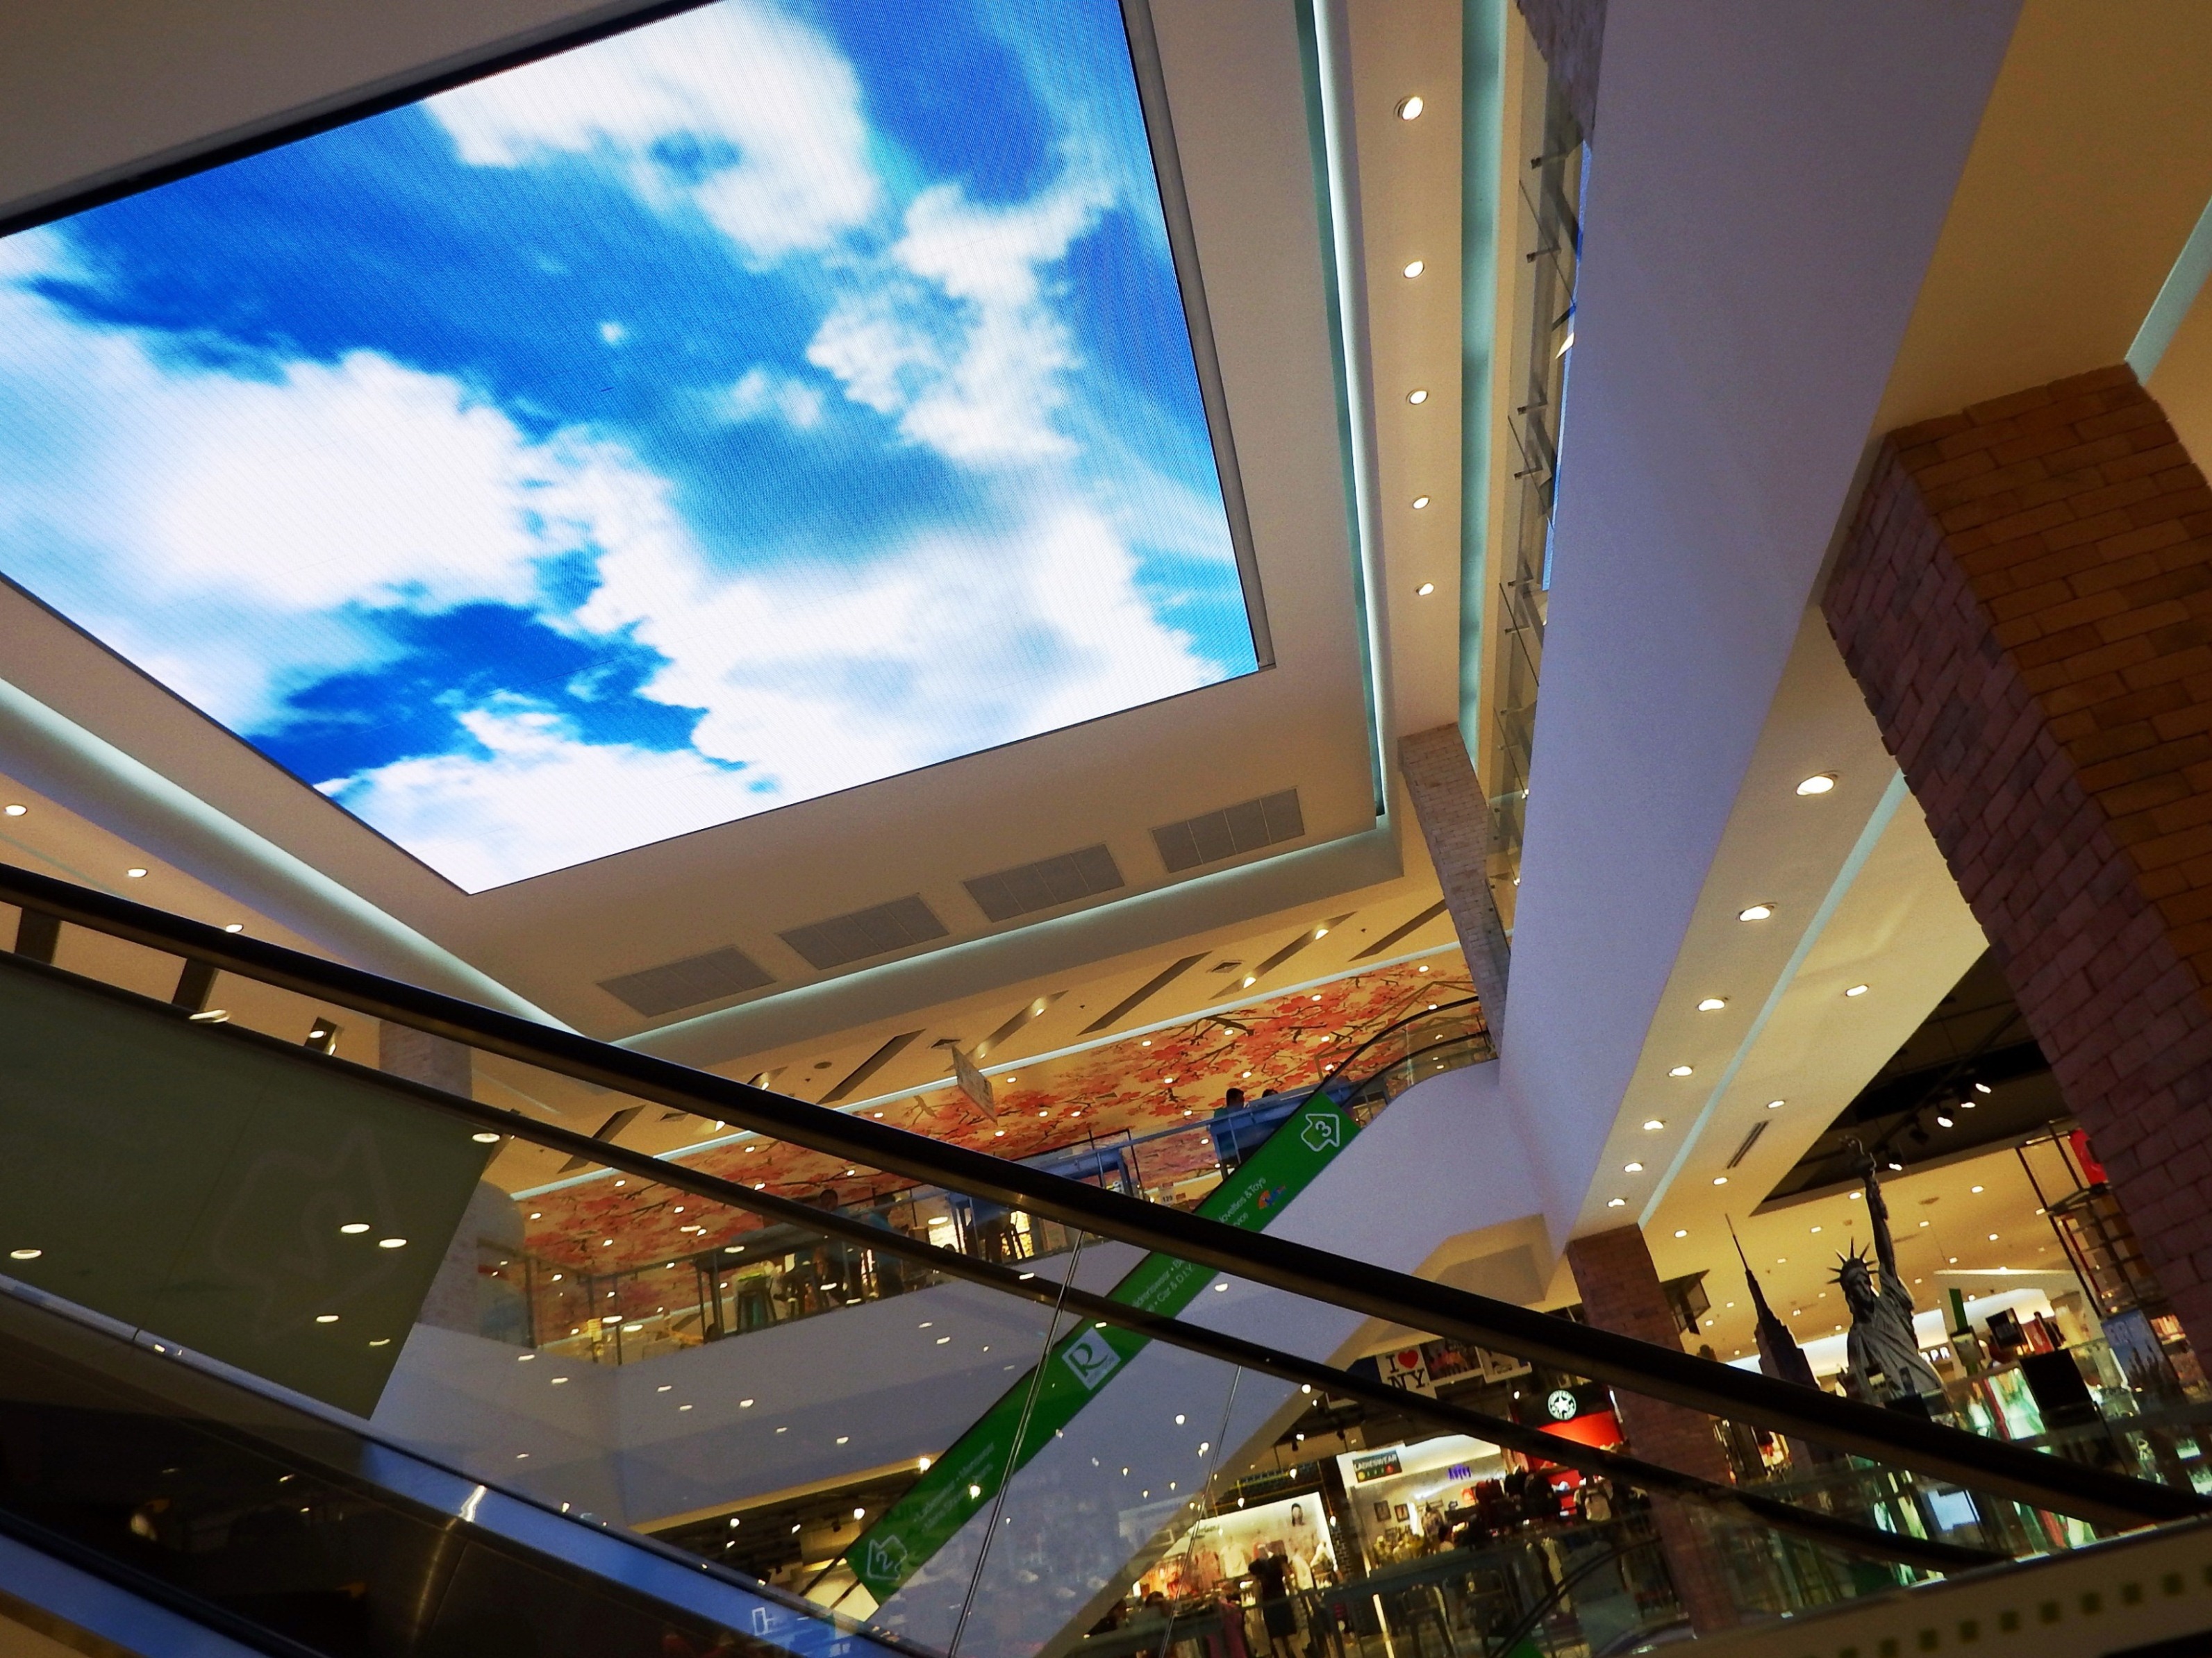 Shoping center ceiling tv photo